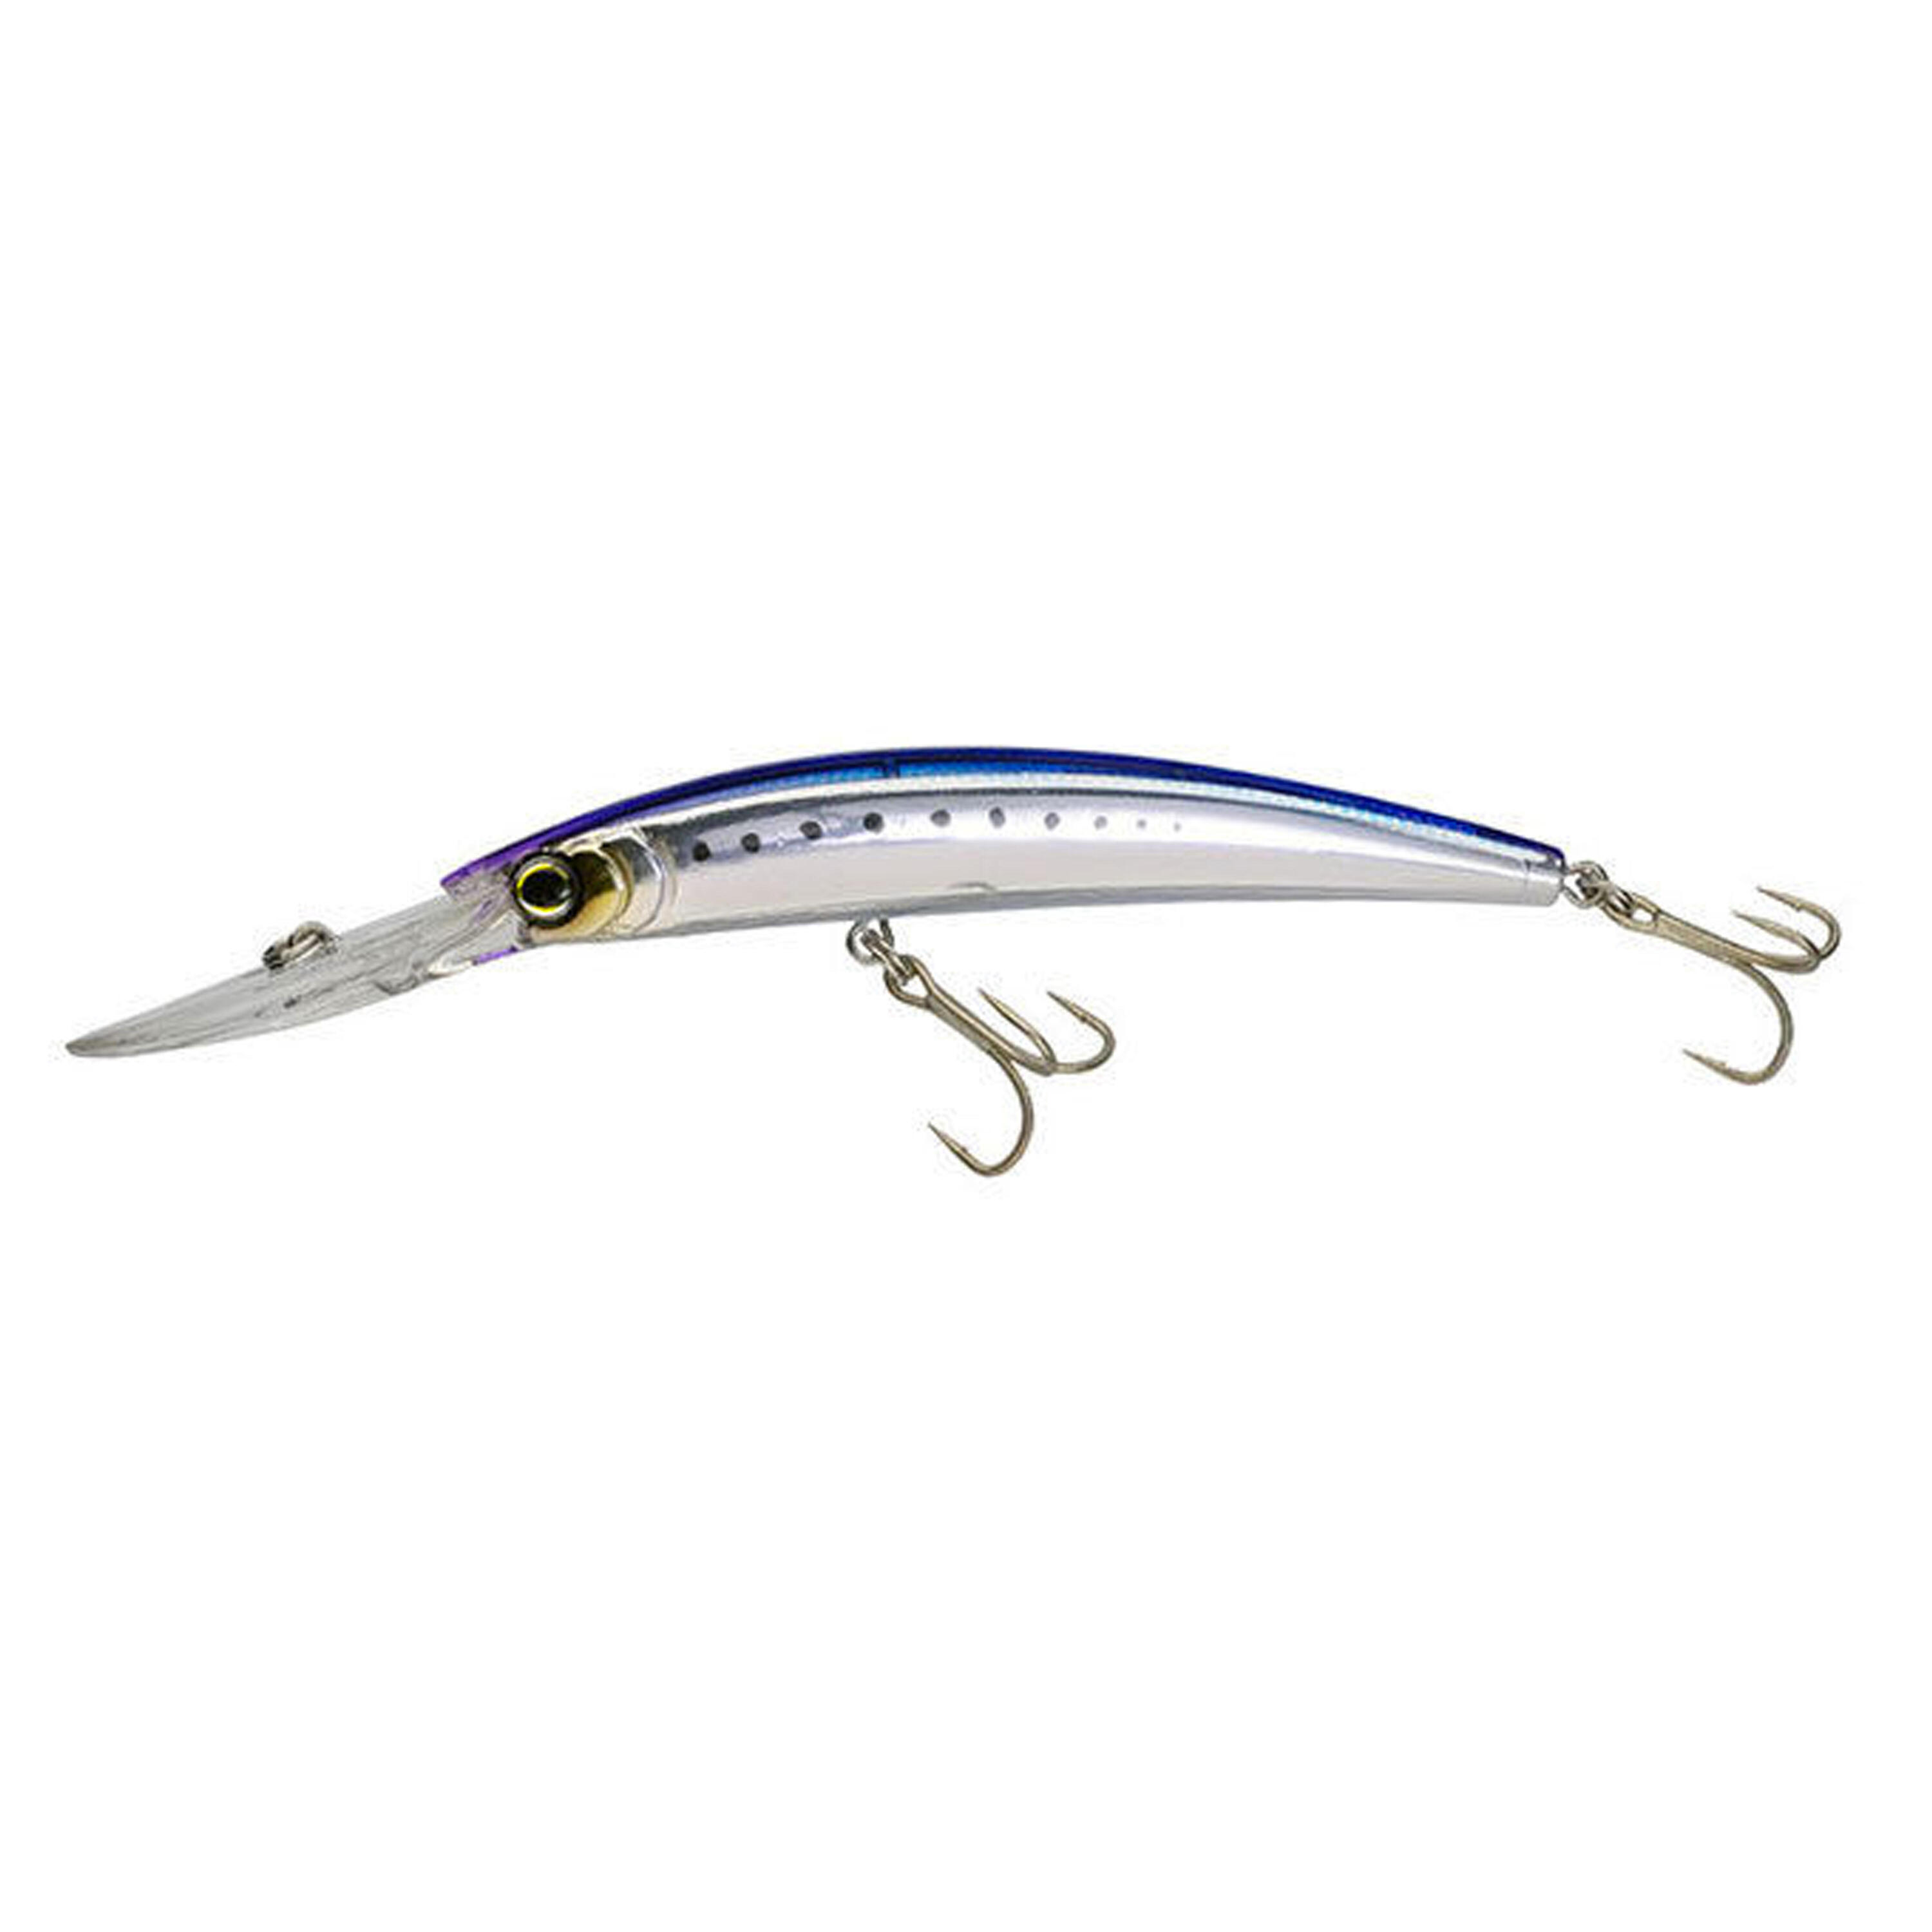 Crystal Deep Diver HIW 90 Trolling Lure 1/1